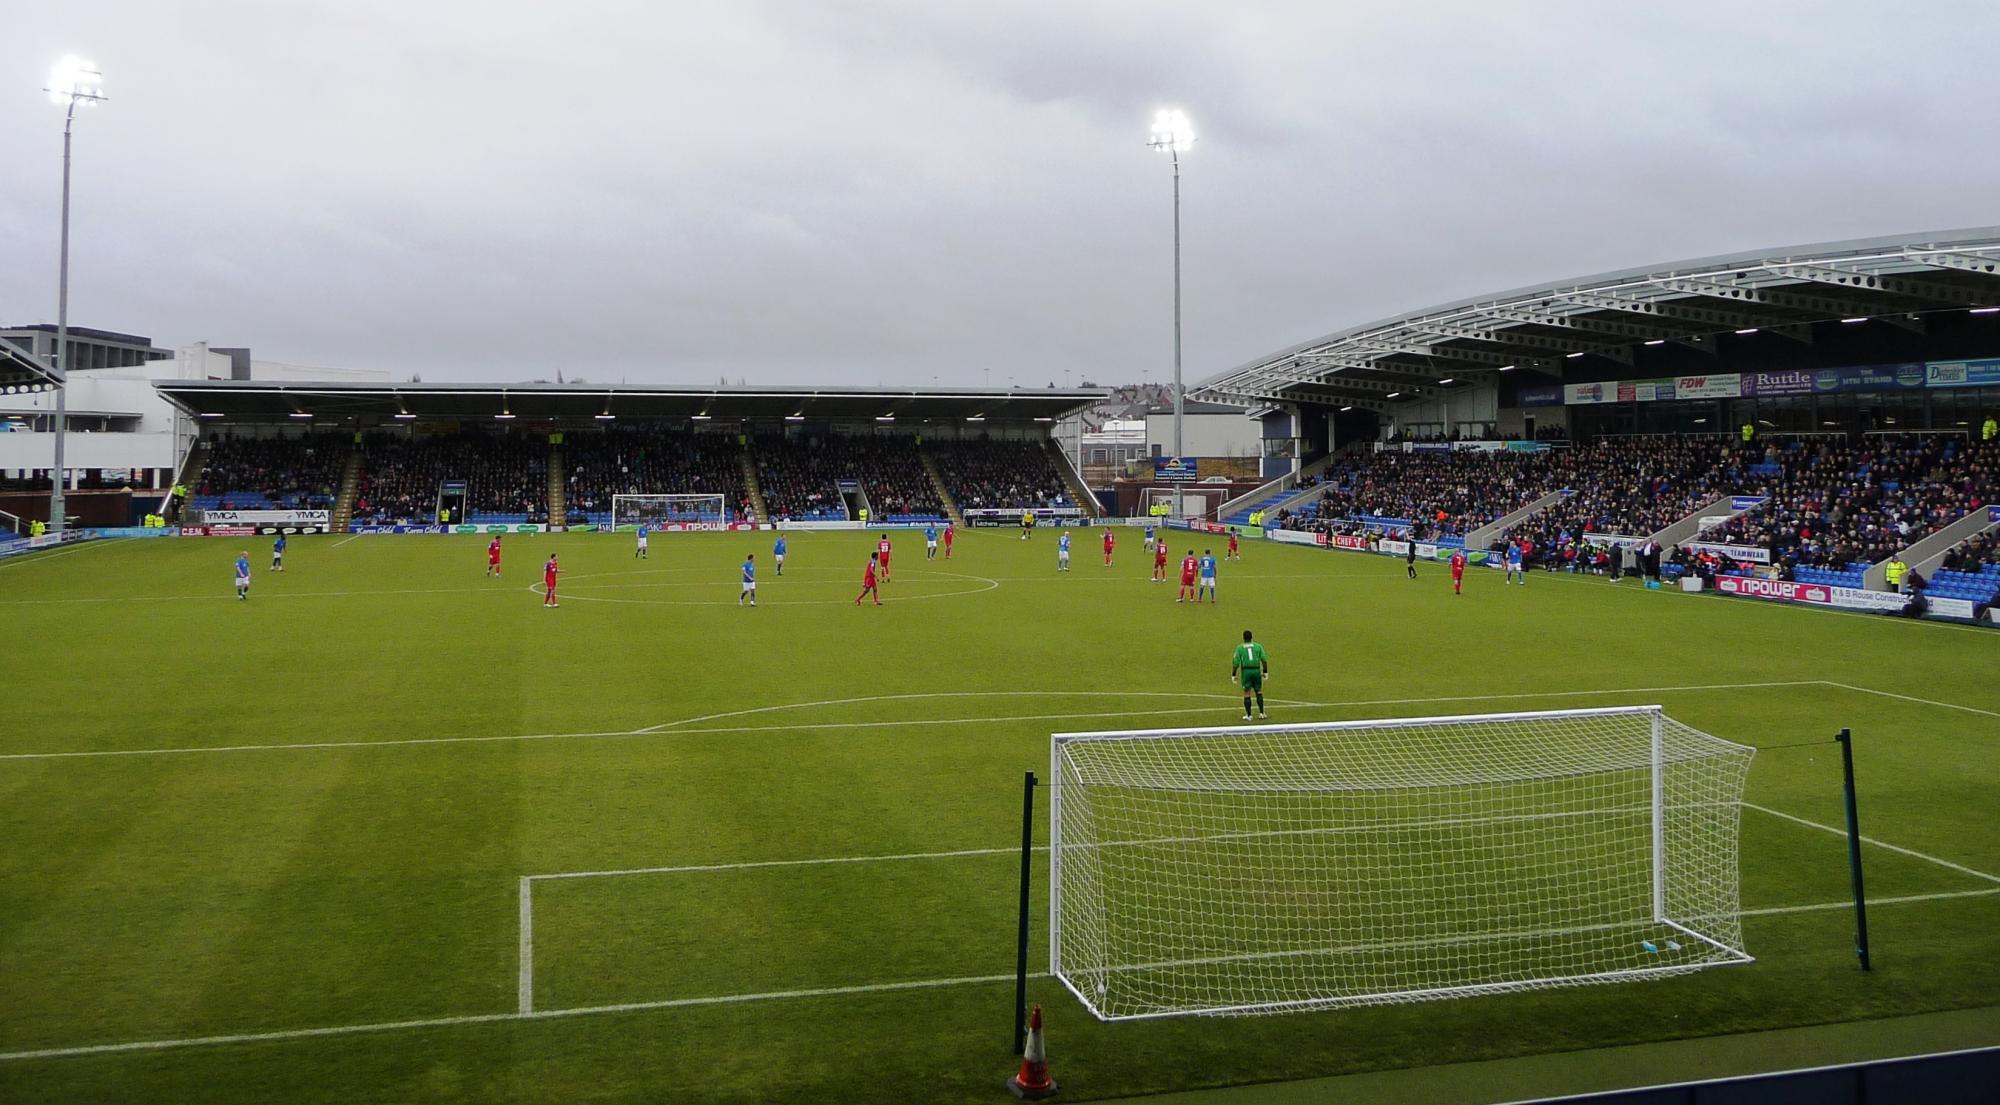 chesterfield fc - photo #21